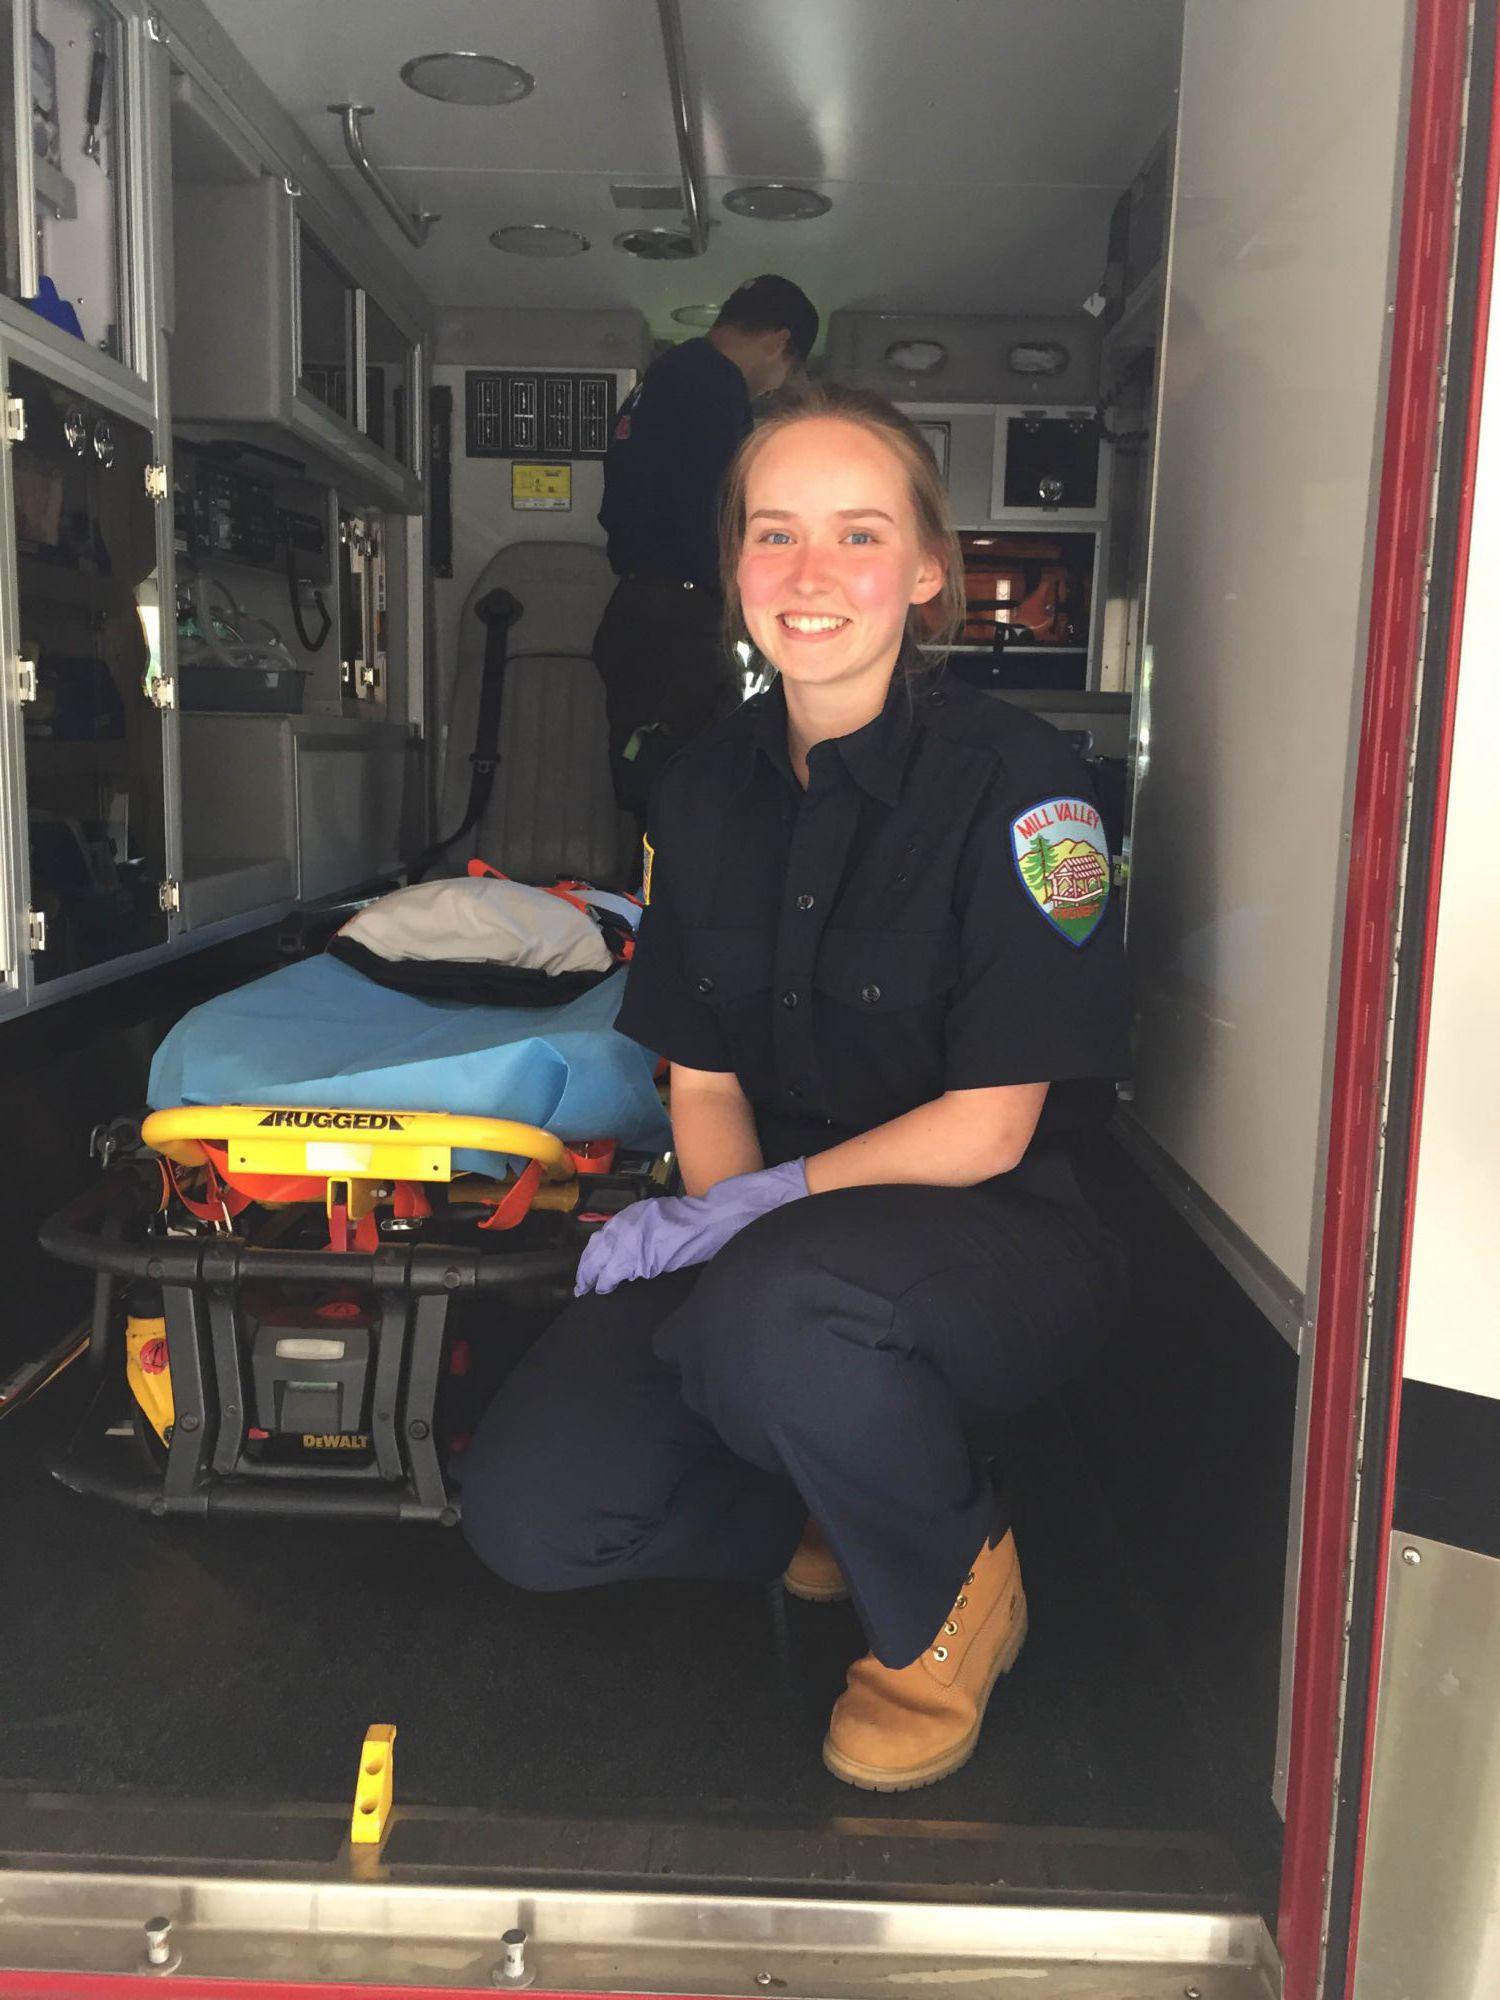 Exploring her interest in emergency car, Vivienne Ward interned at the Mill Valley Fire Department through the organization Jewish Family and Children's Services, which provides opportunities to work with nonprofits and businesses, 